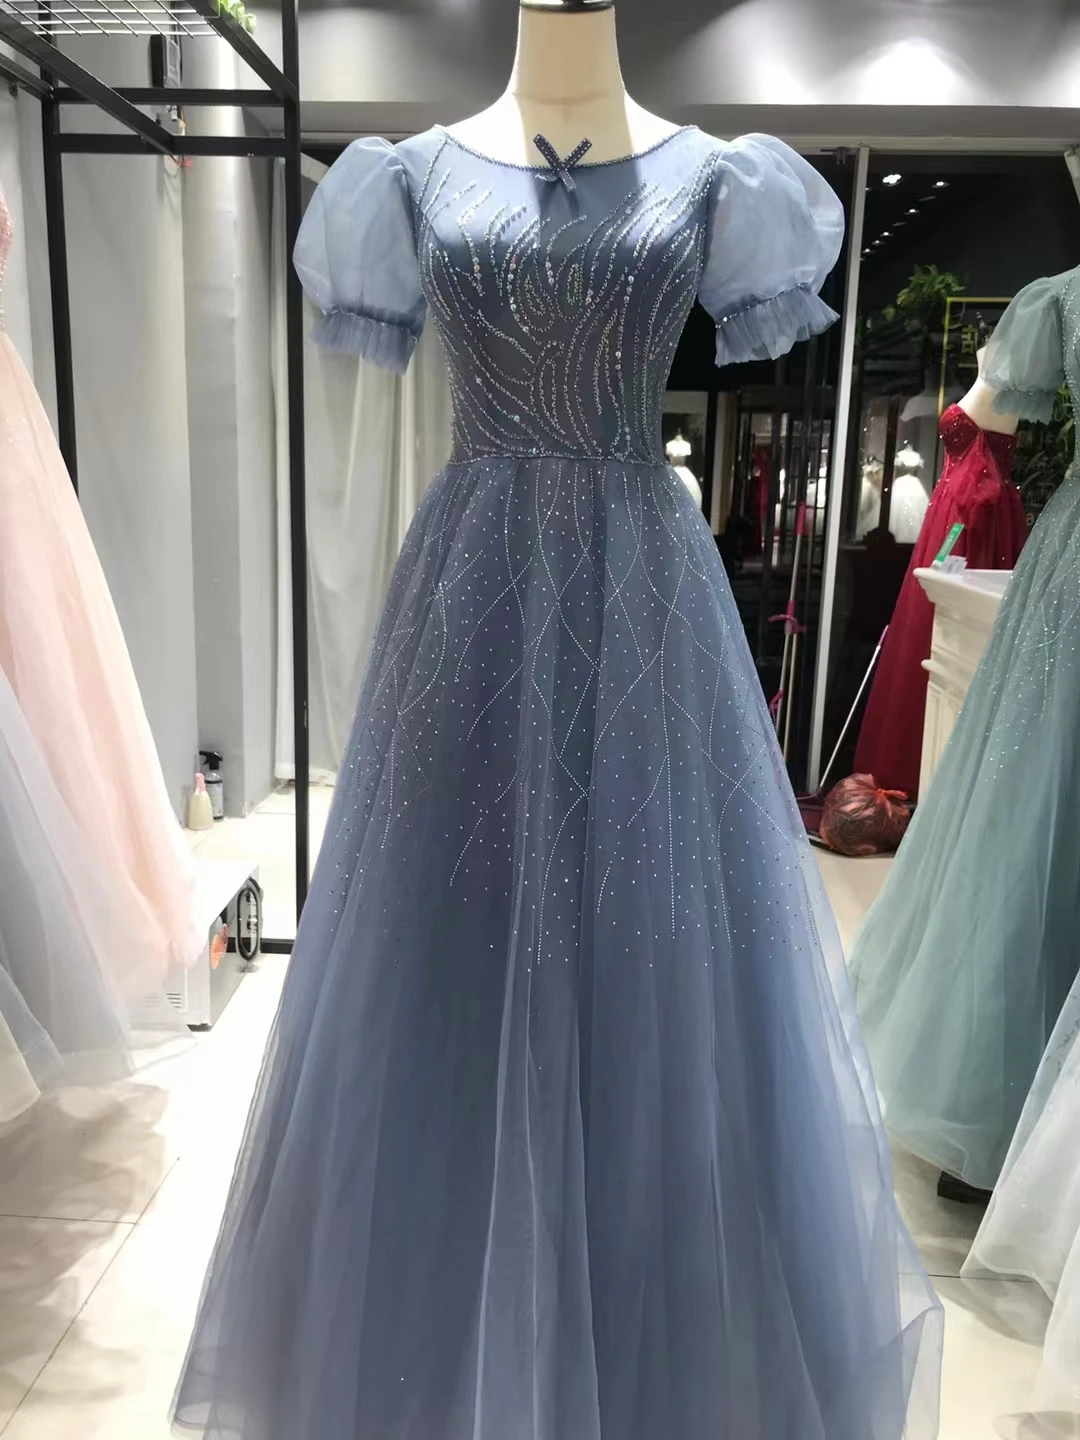 SSYFashion Luxury Sequins Beading Evening Dress Puff Sleeve A-line Scoop Long Formal Party Gowns for Women 6 Colors Custom Size evening dresses for weddings